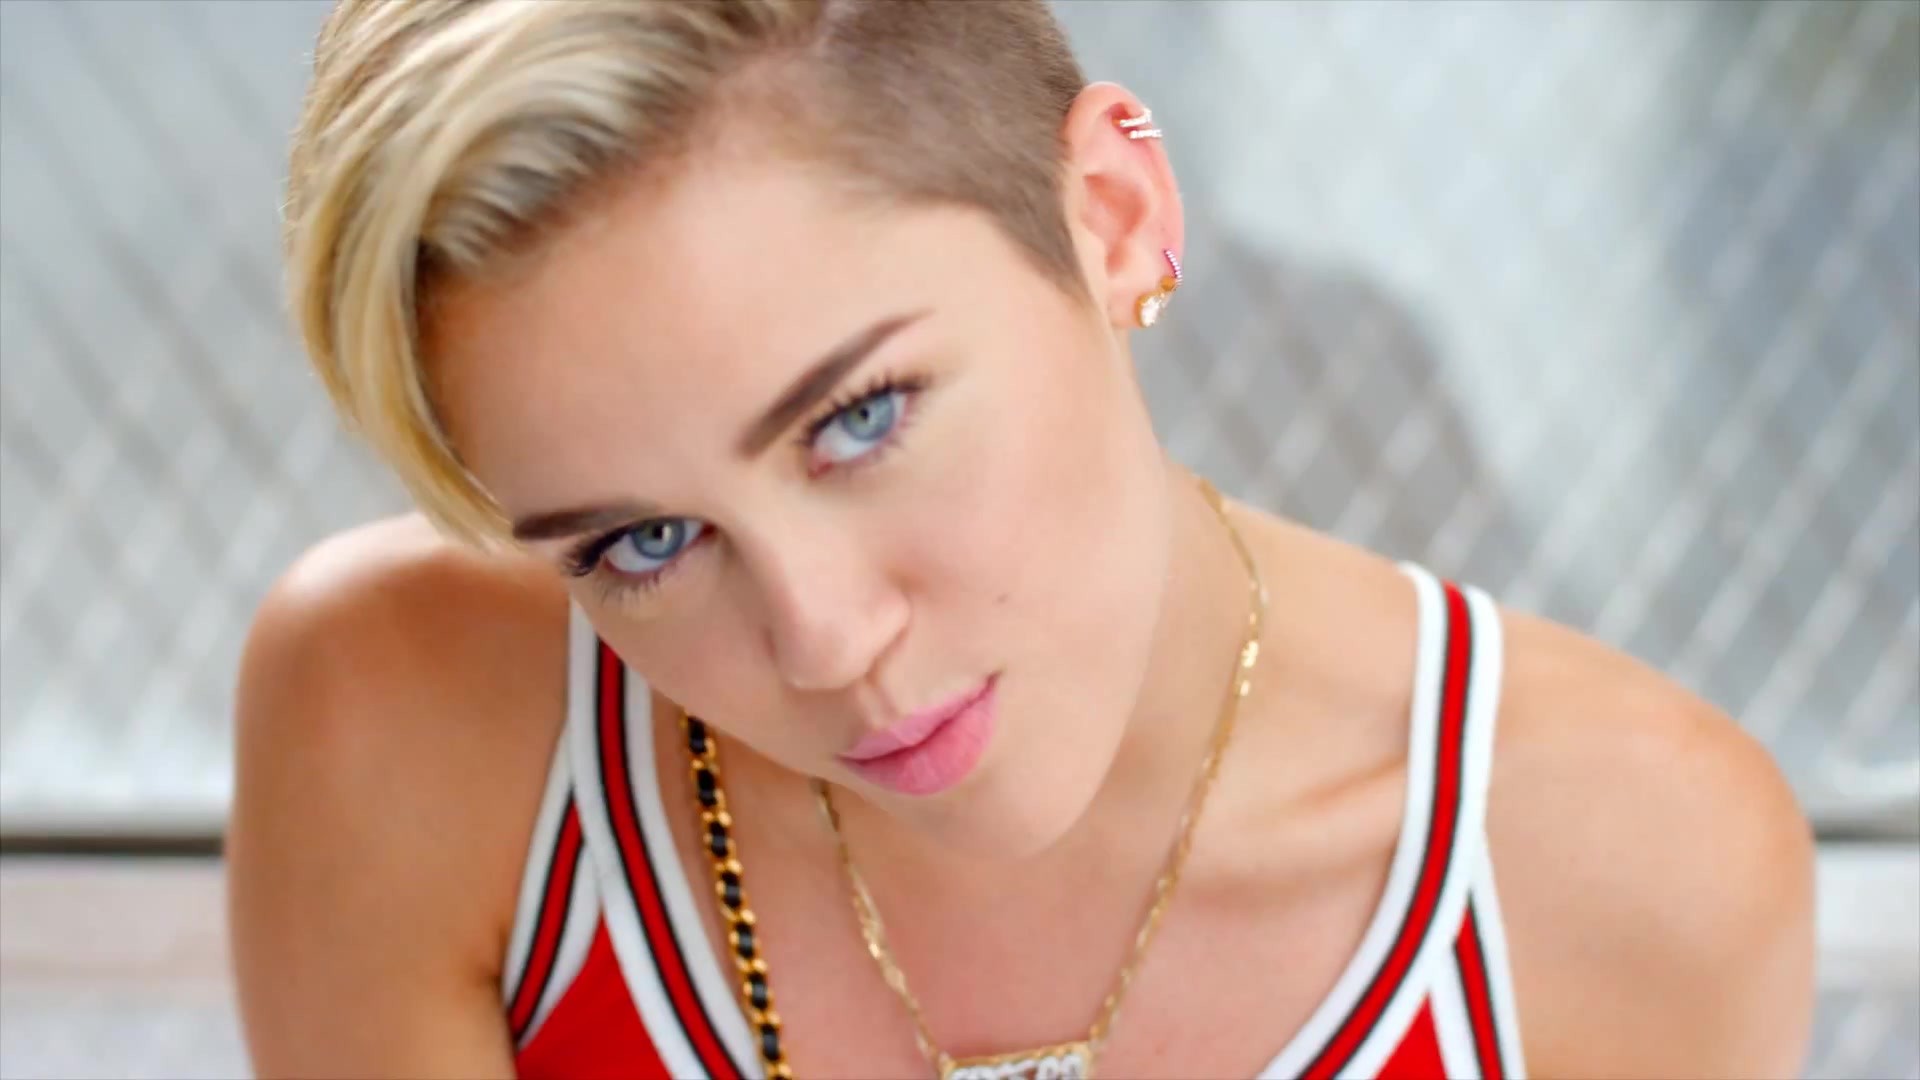 Miley Cyrus Face Wallpapers